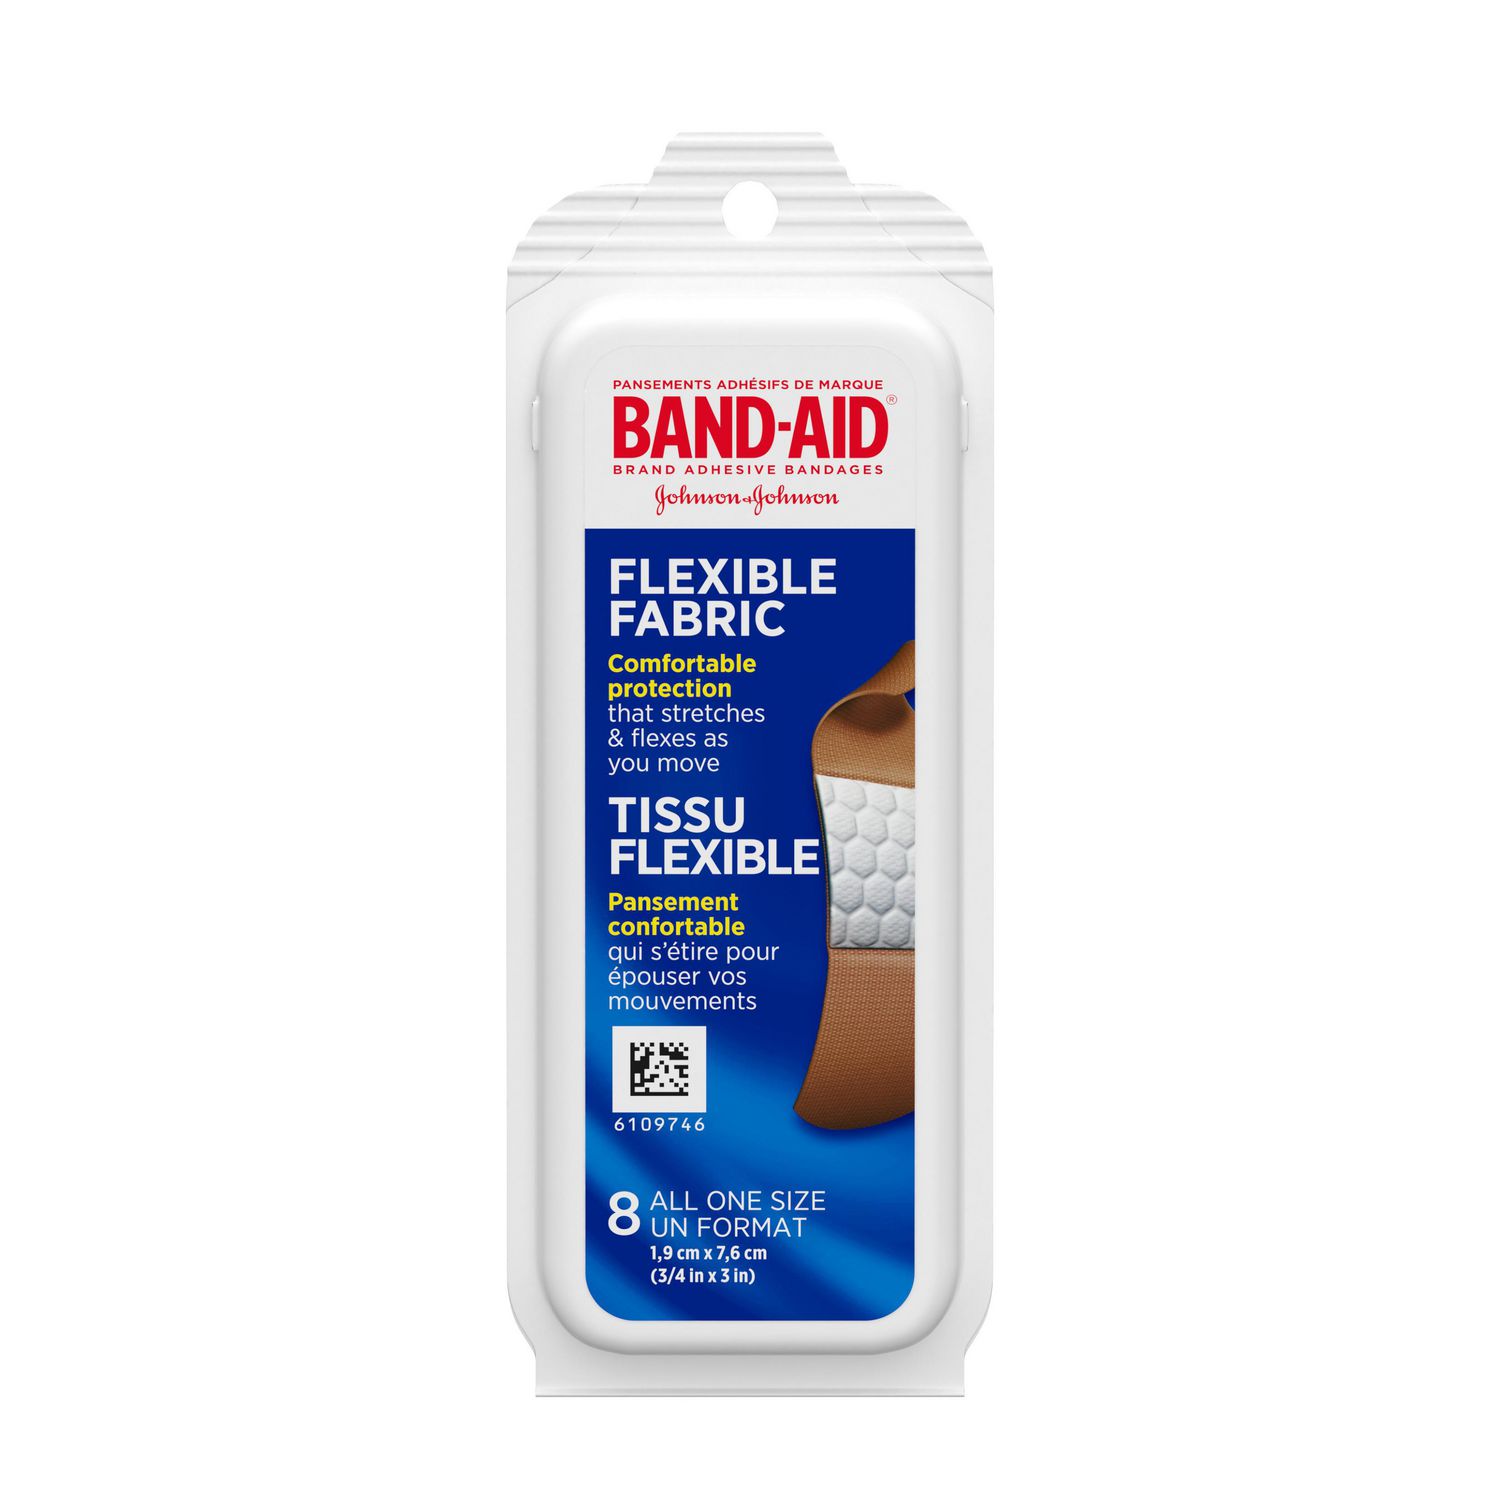 Band-Aid Brand Flexible Fabric Adhesive Bandages for Flexible